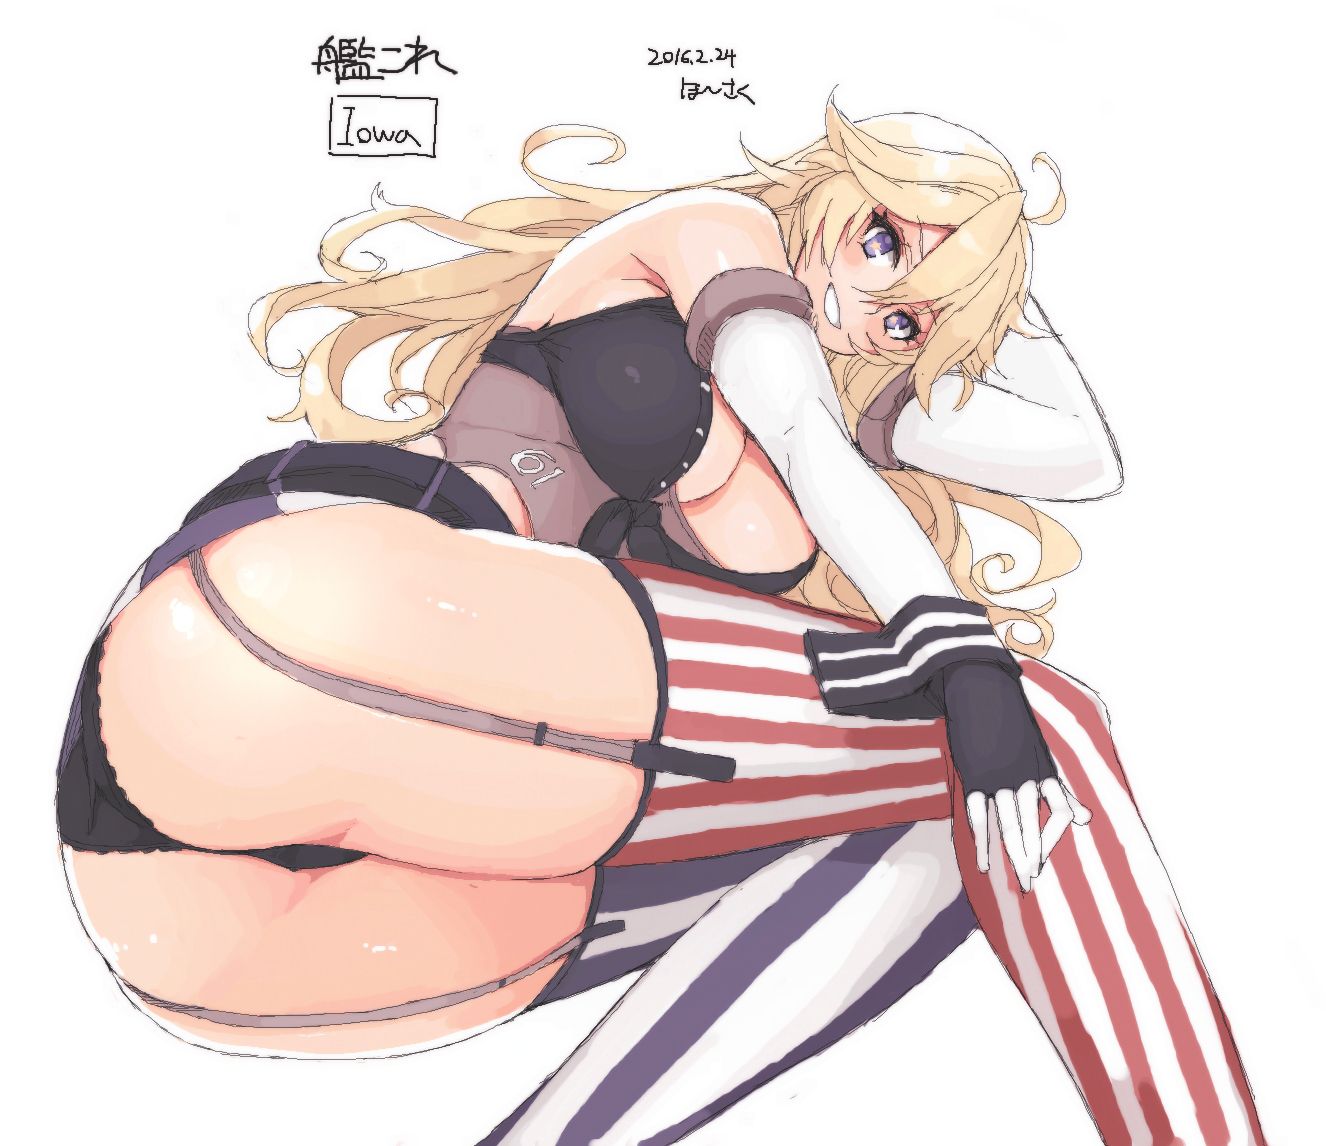 [Second / ZIP] USA! USA! Piow Chanko and ship it together images of Iowa 45